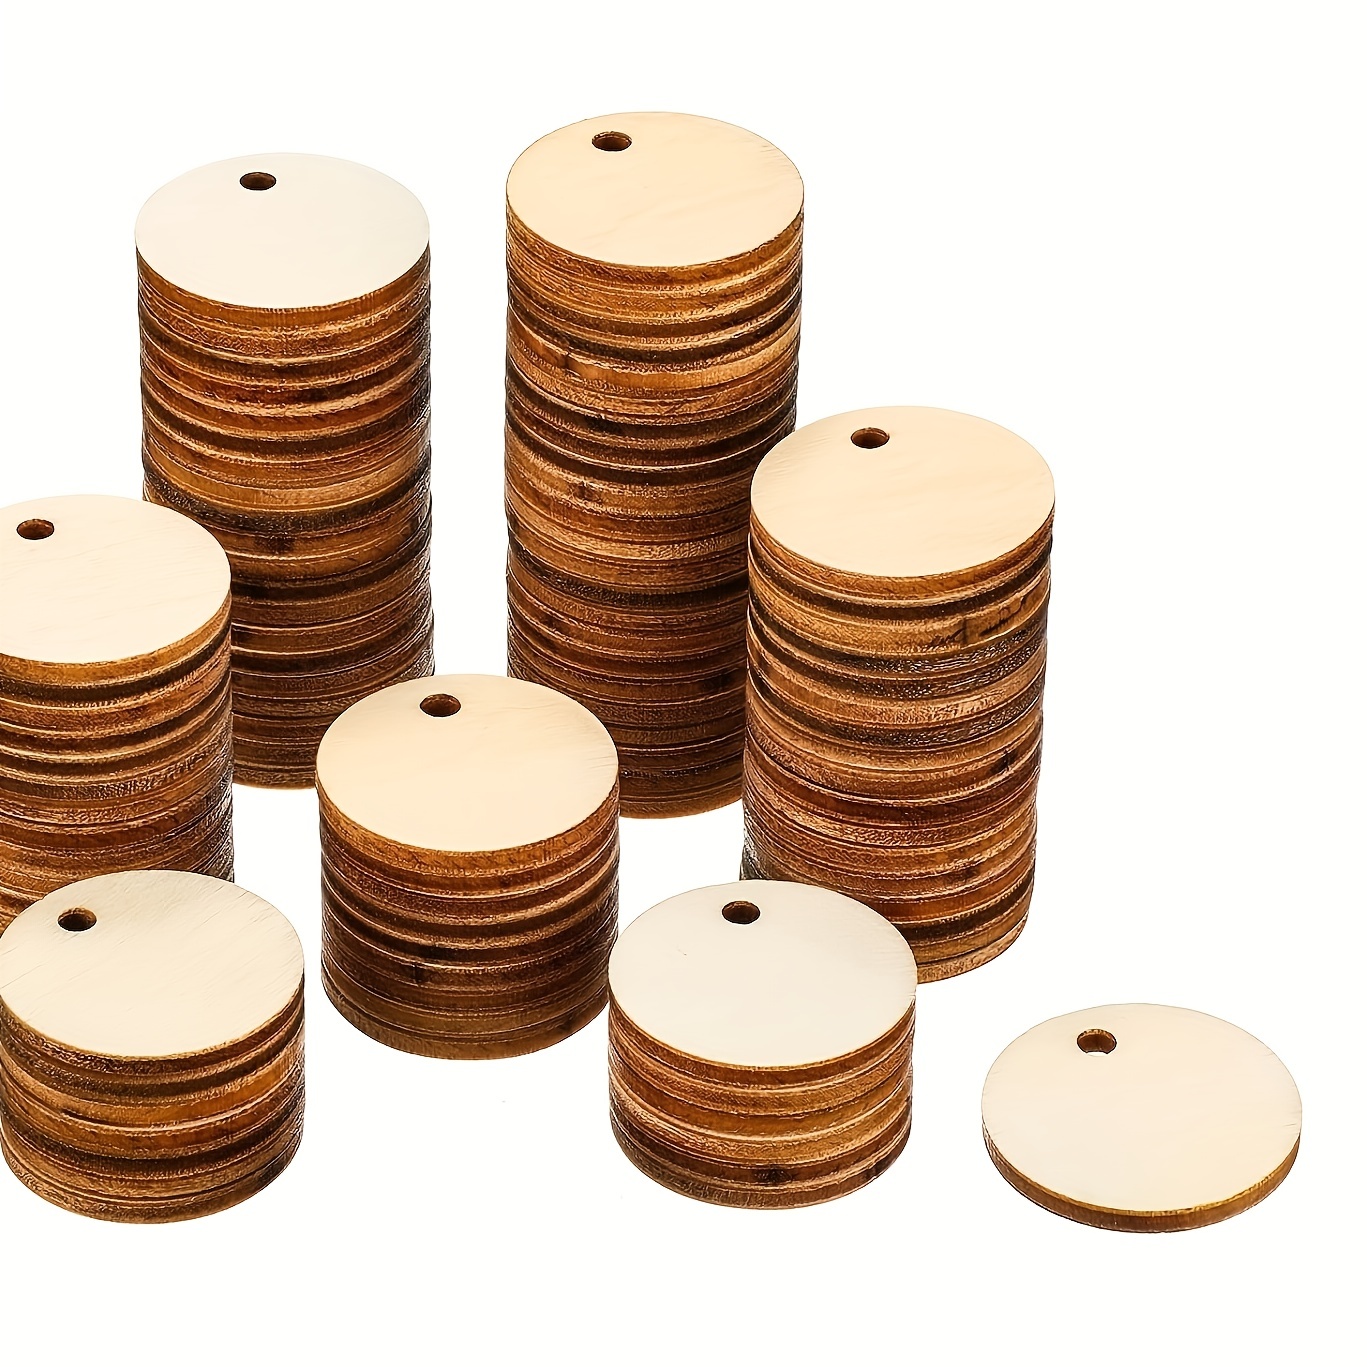 

100pcs, Round Wooden Circles Tags Ornaments With 1 Hole Wood Coin Discs For Crafts Blank Cutouts Pendants Diy Crafts Party Birthday Christmas Decorations